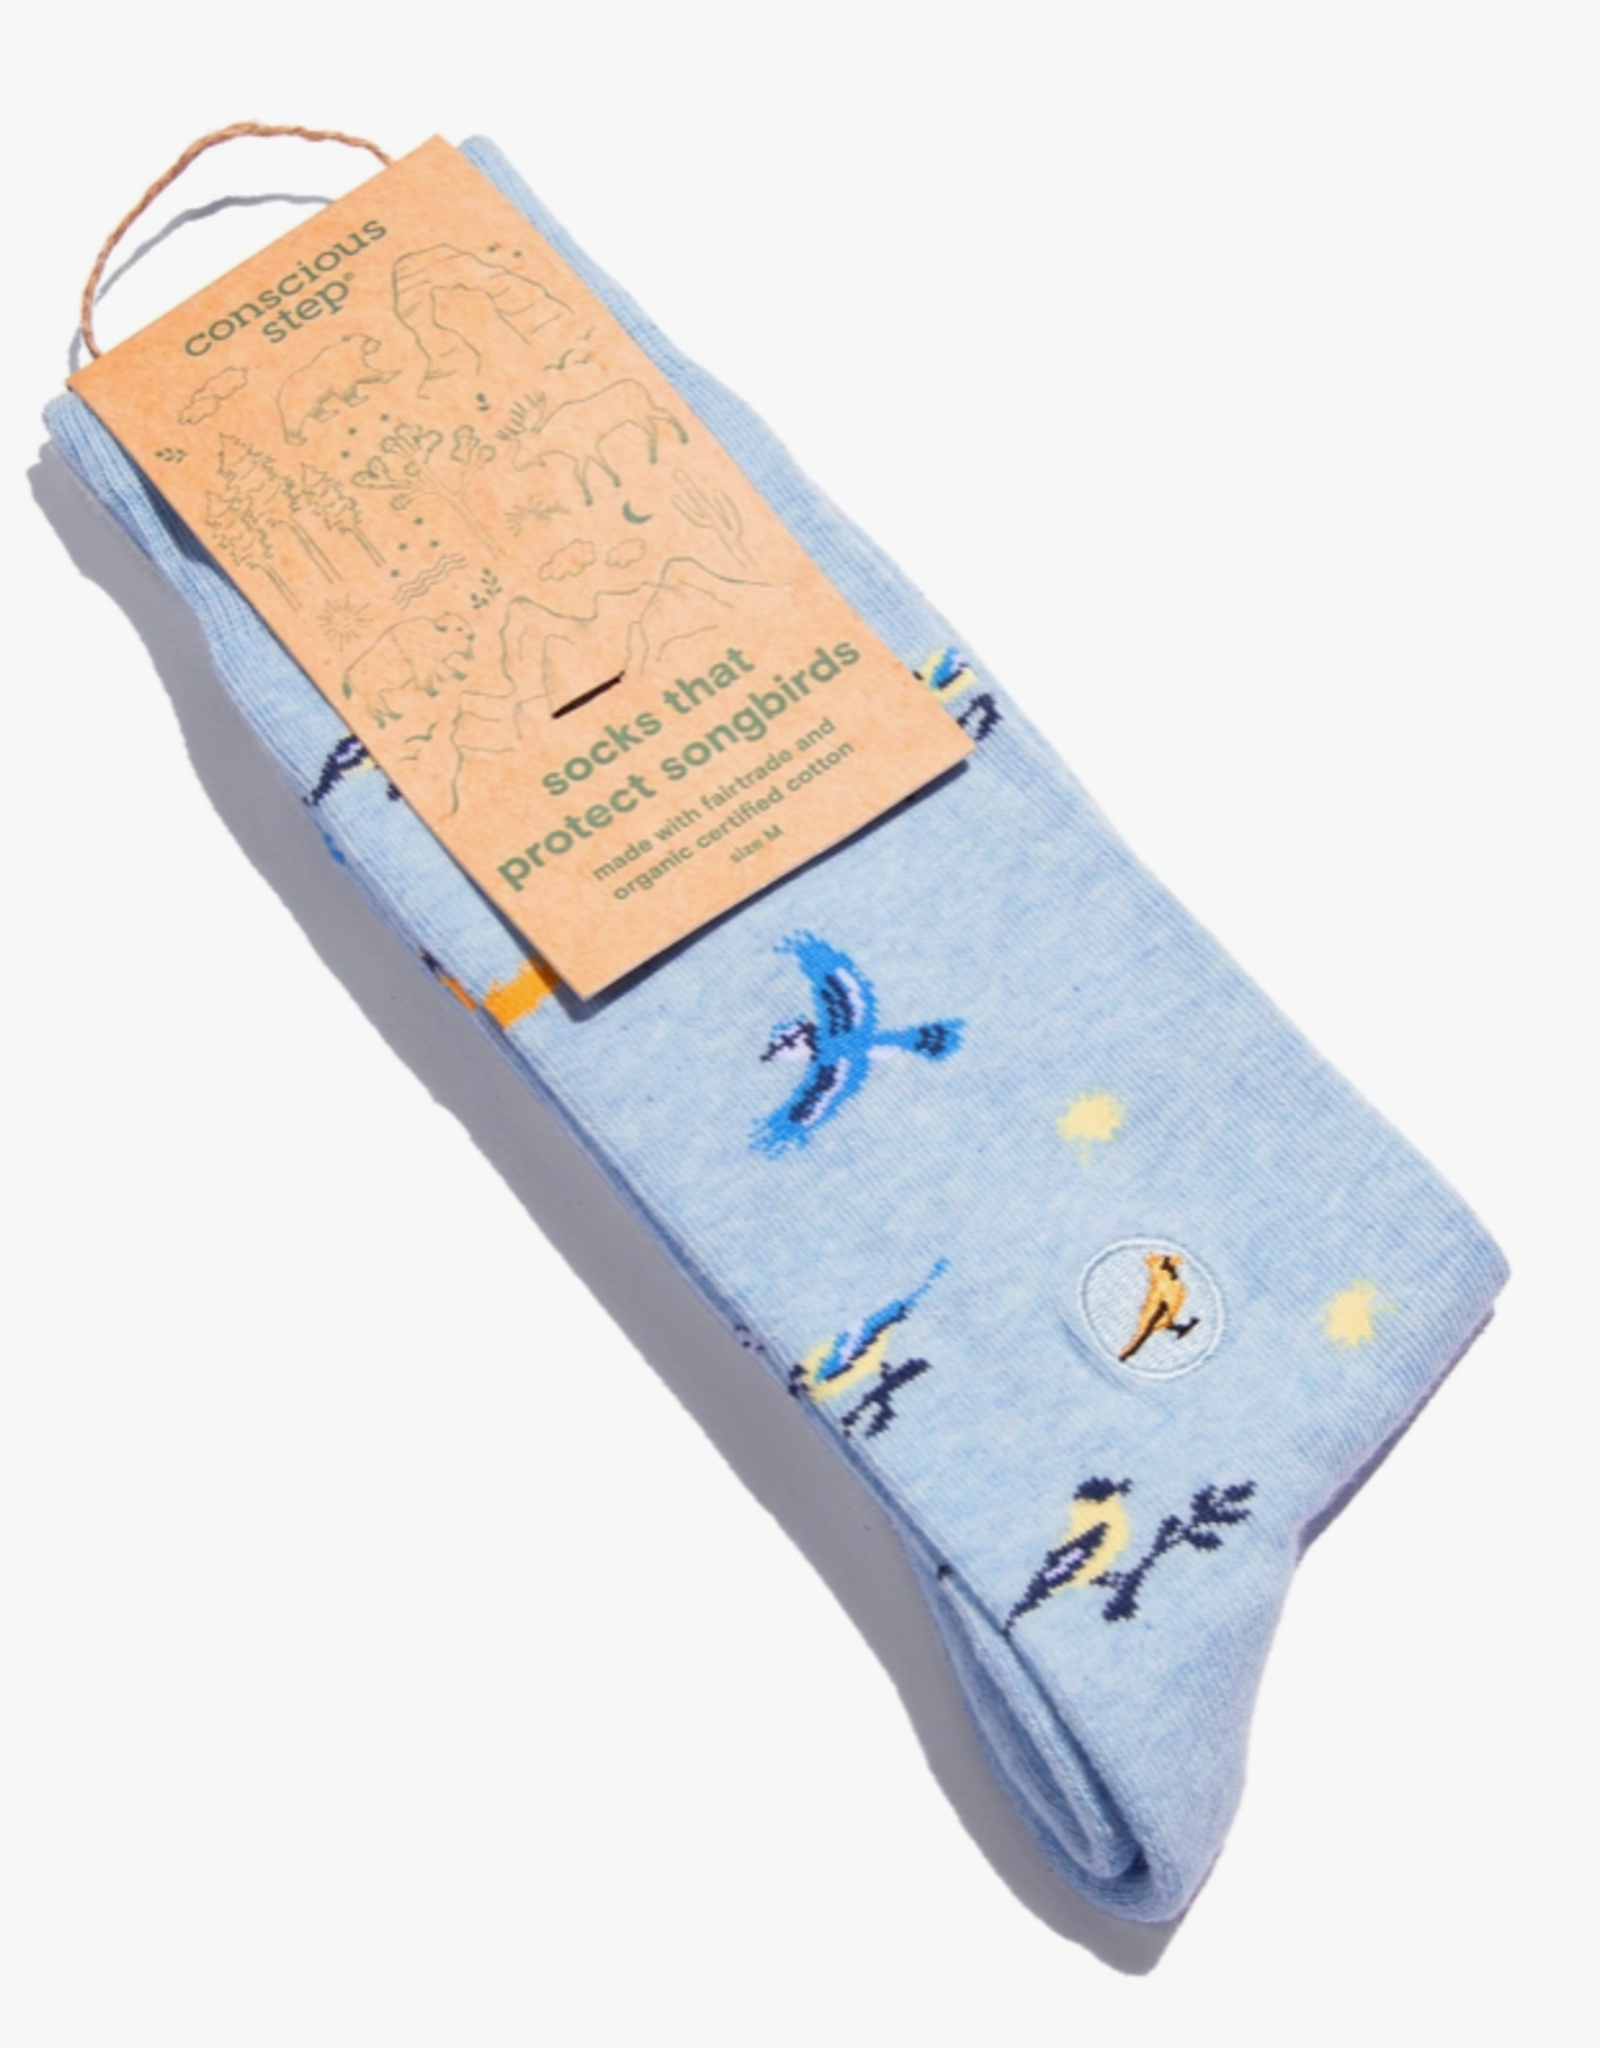 Conscious Step Socks That Protect Songbirds